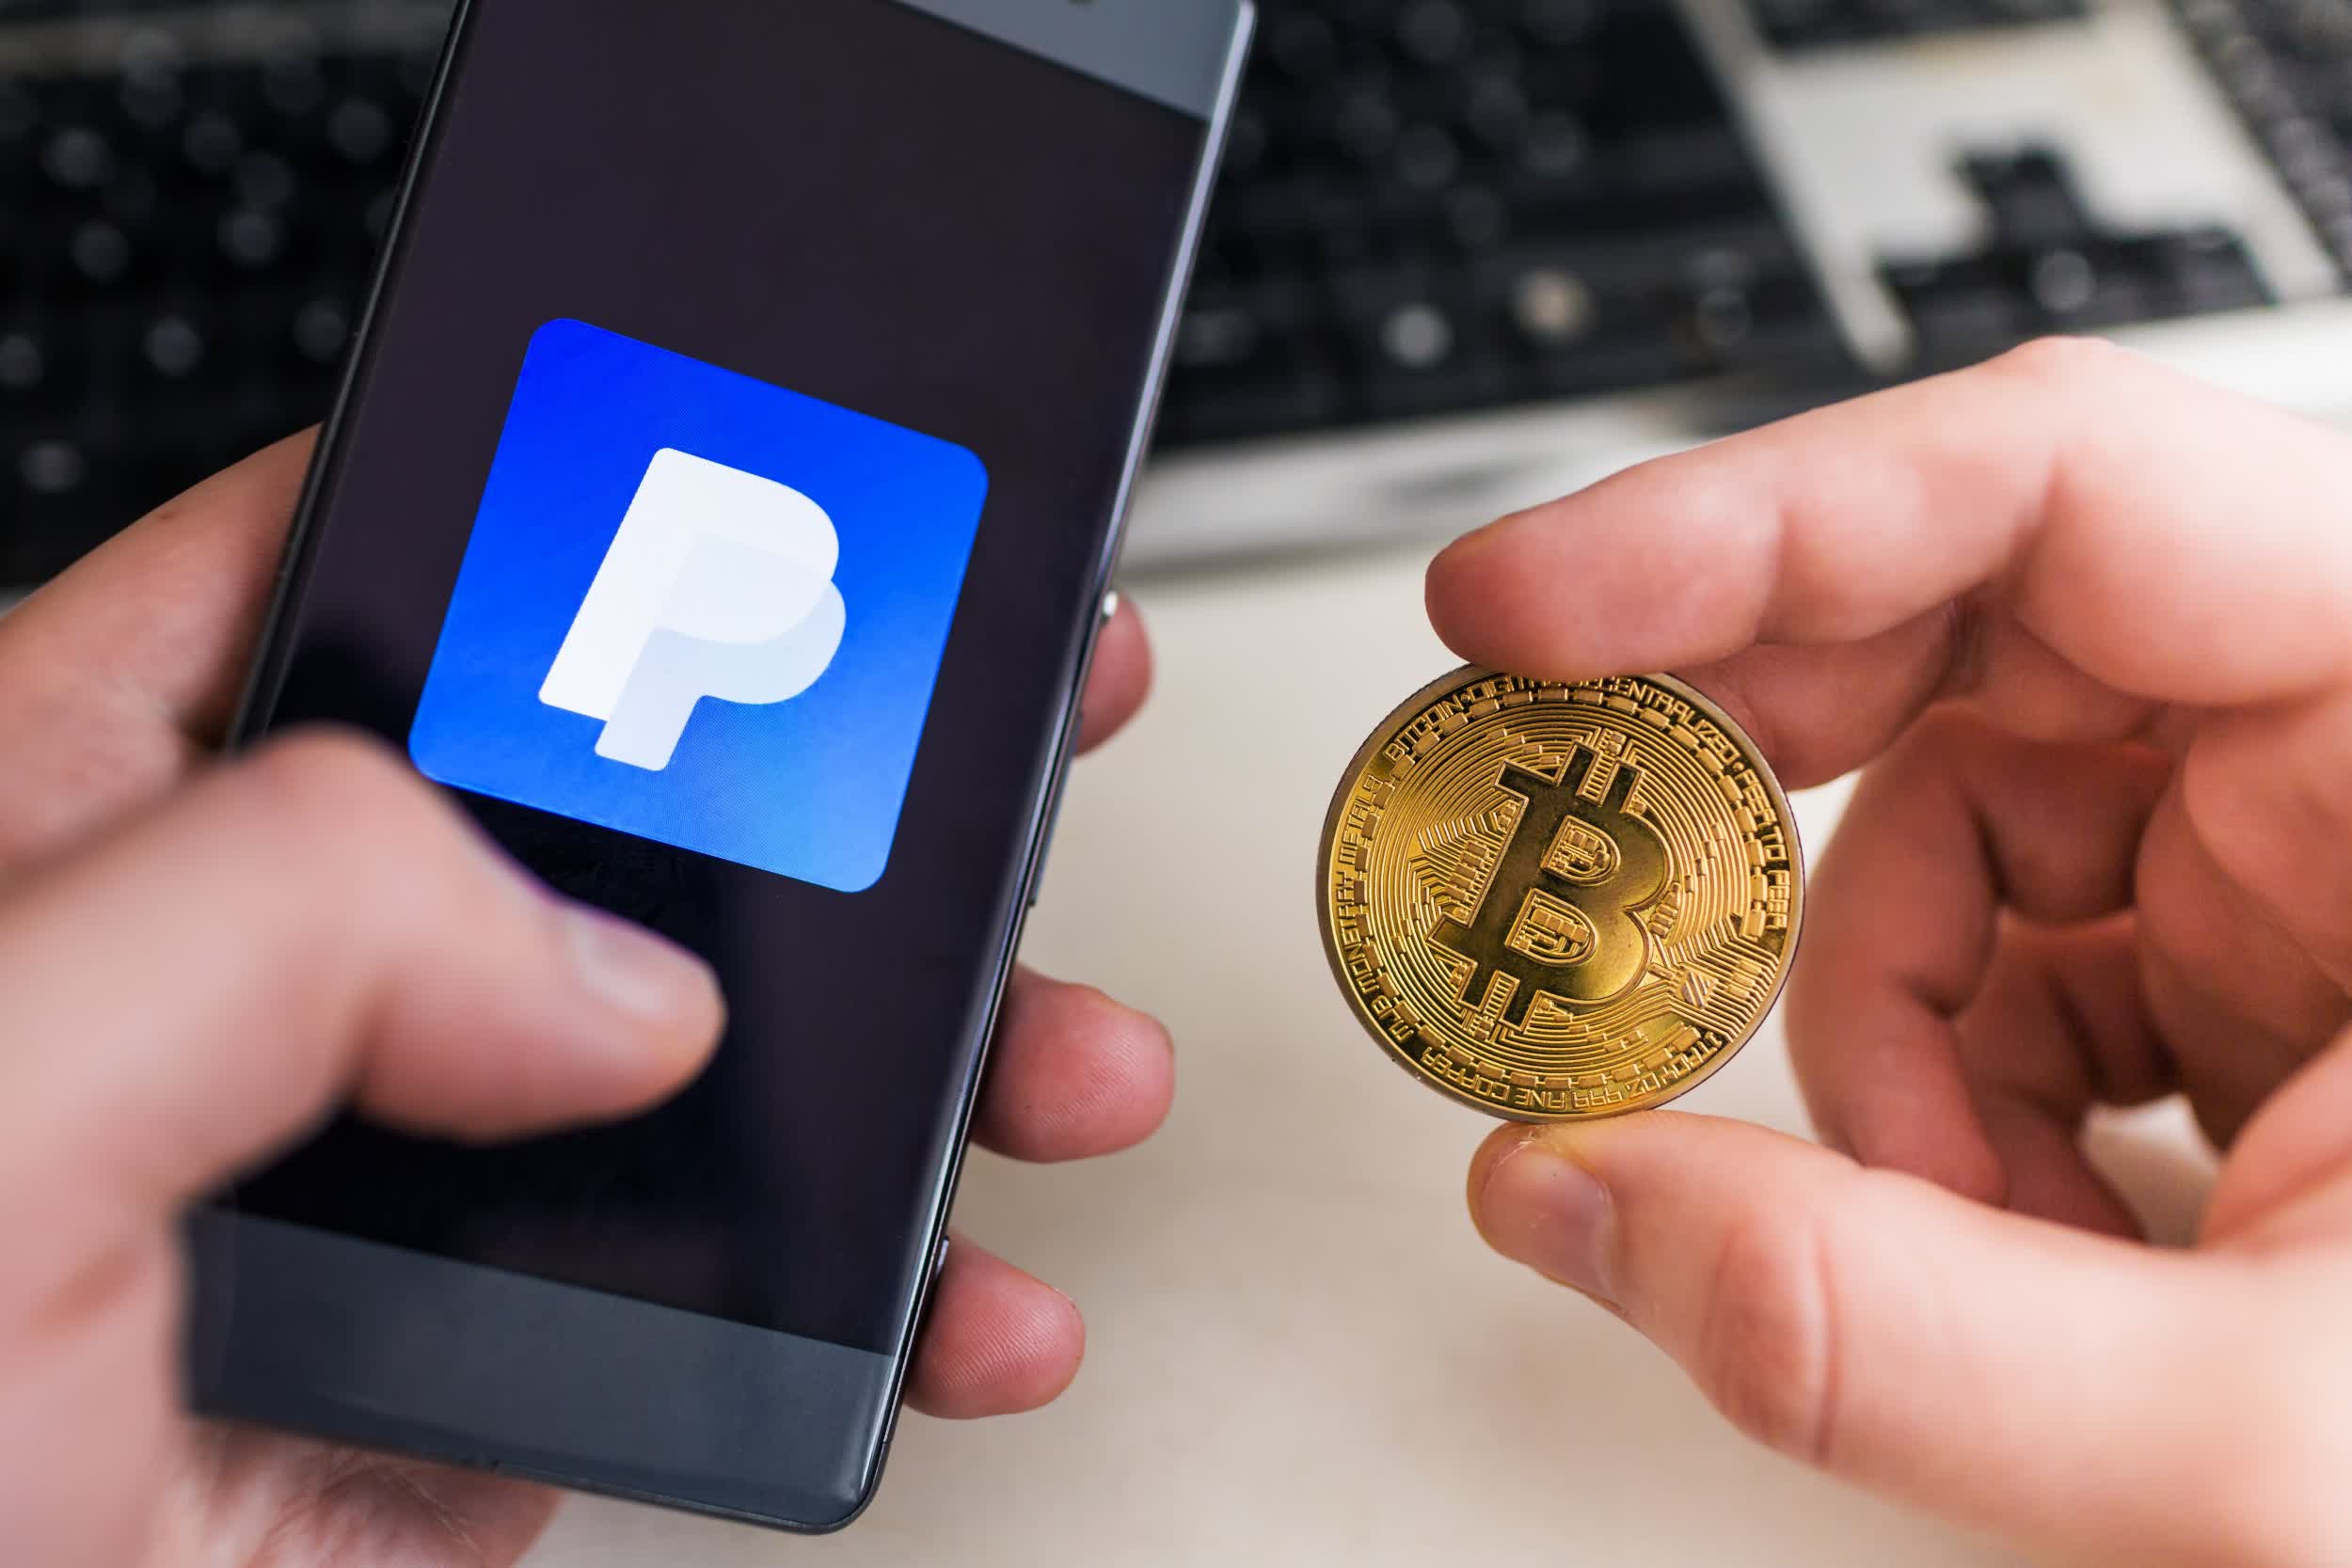 paypal to buy crypto